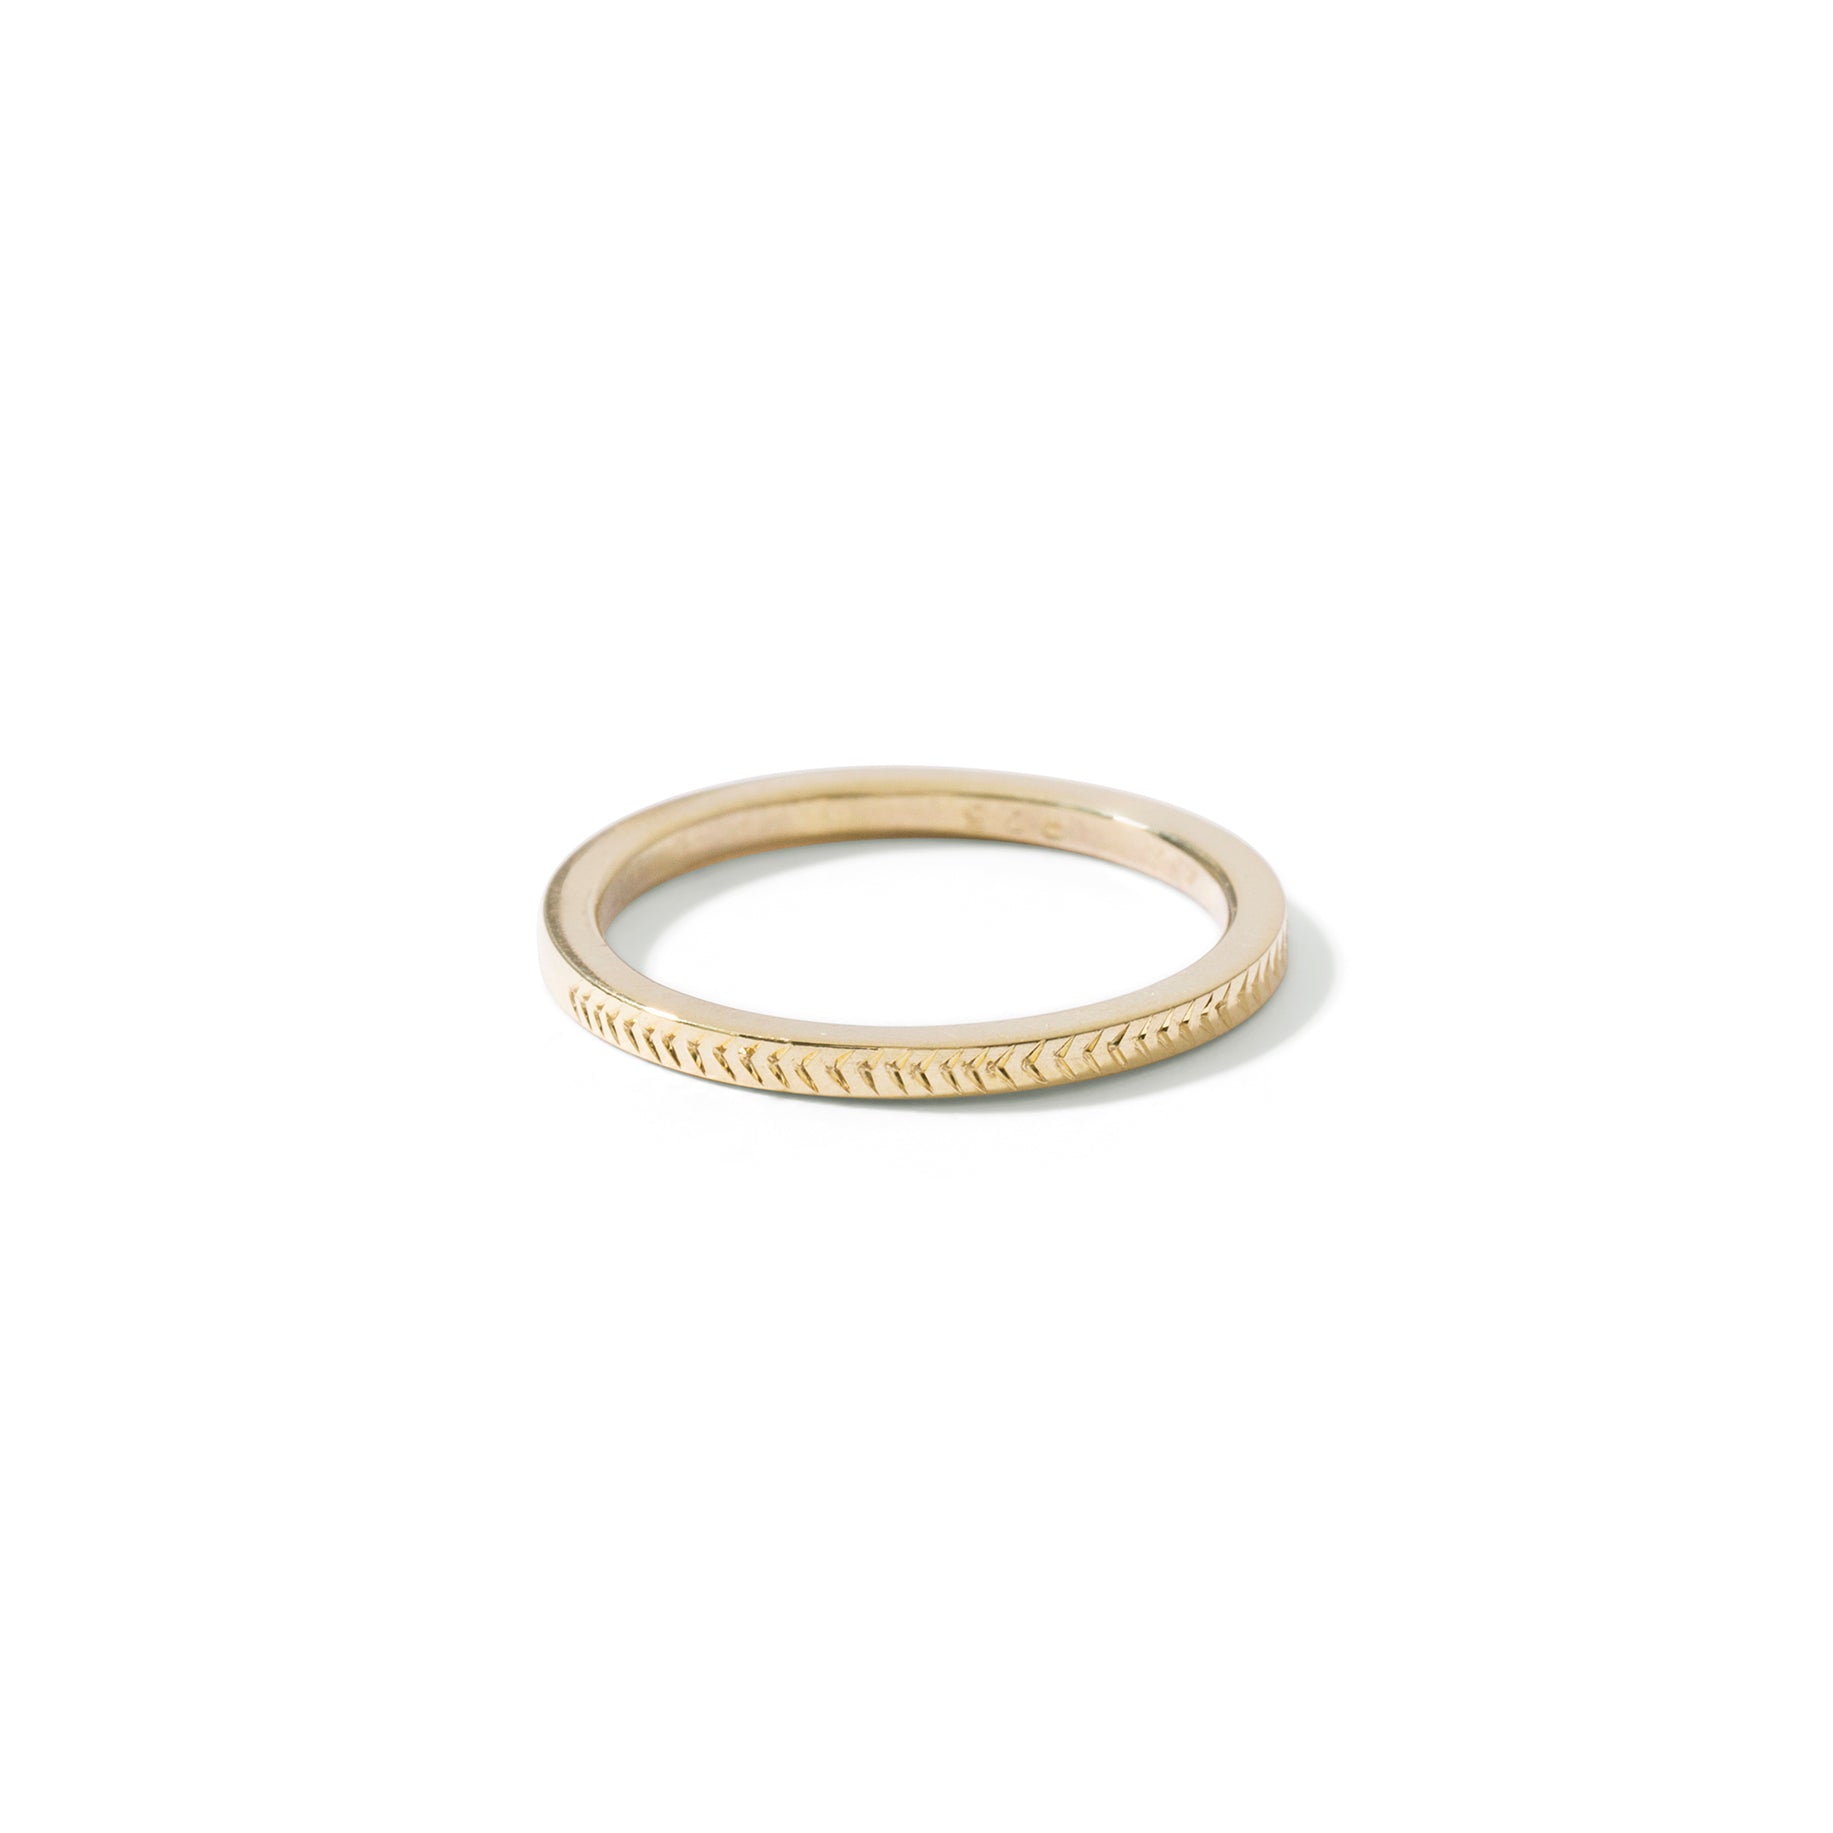 9ct gold square band with chevron engraving